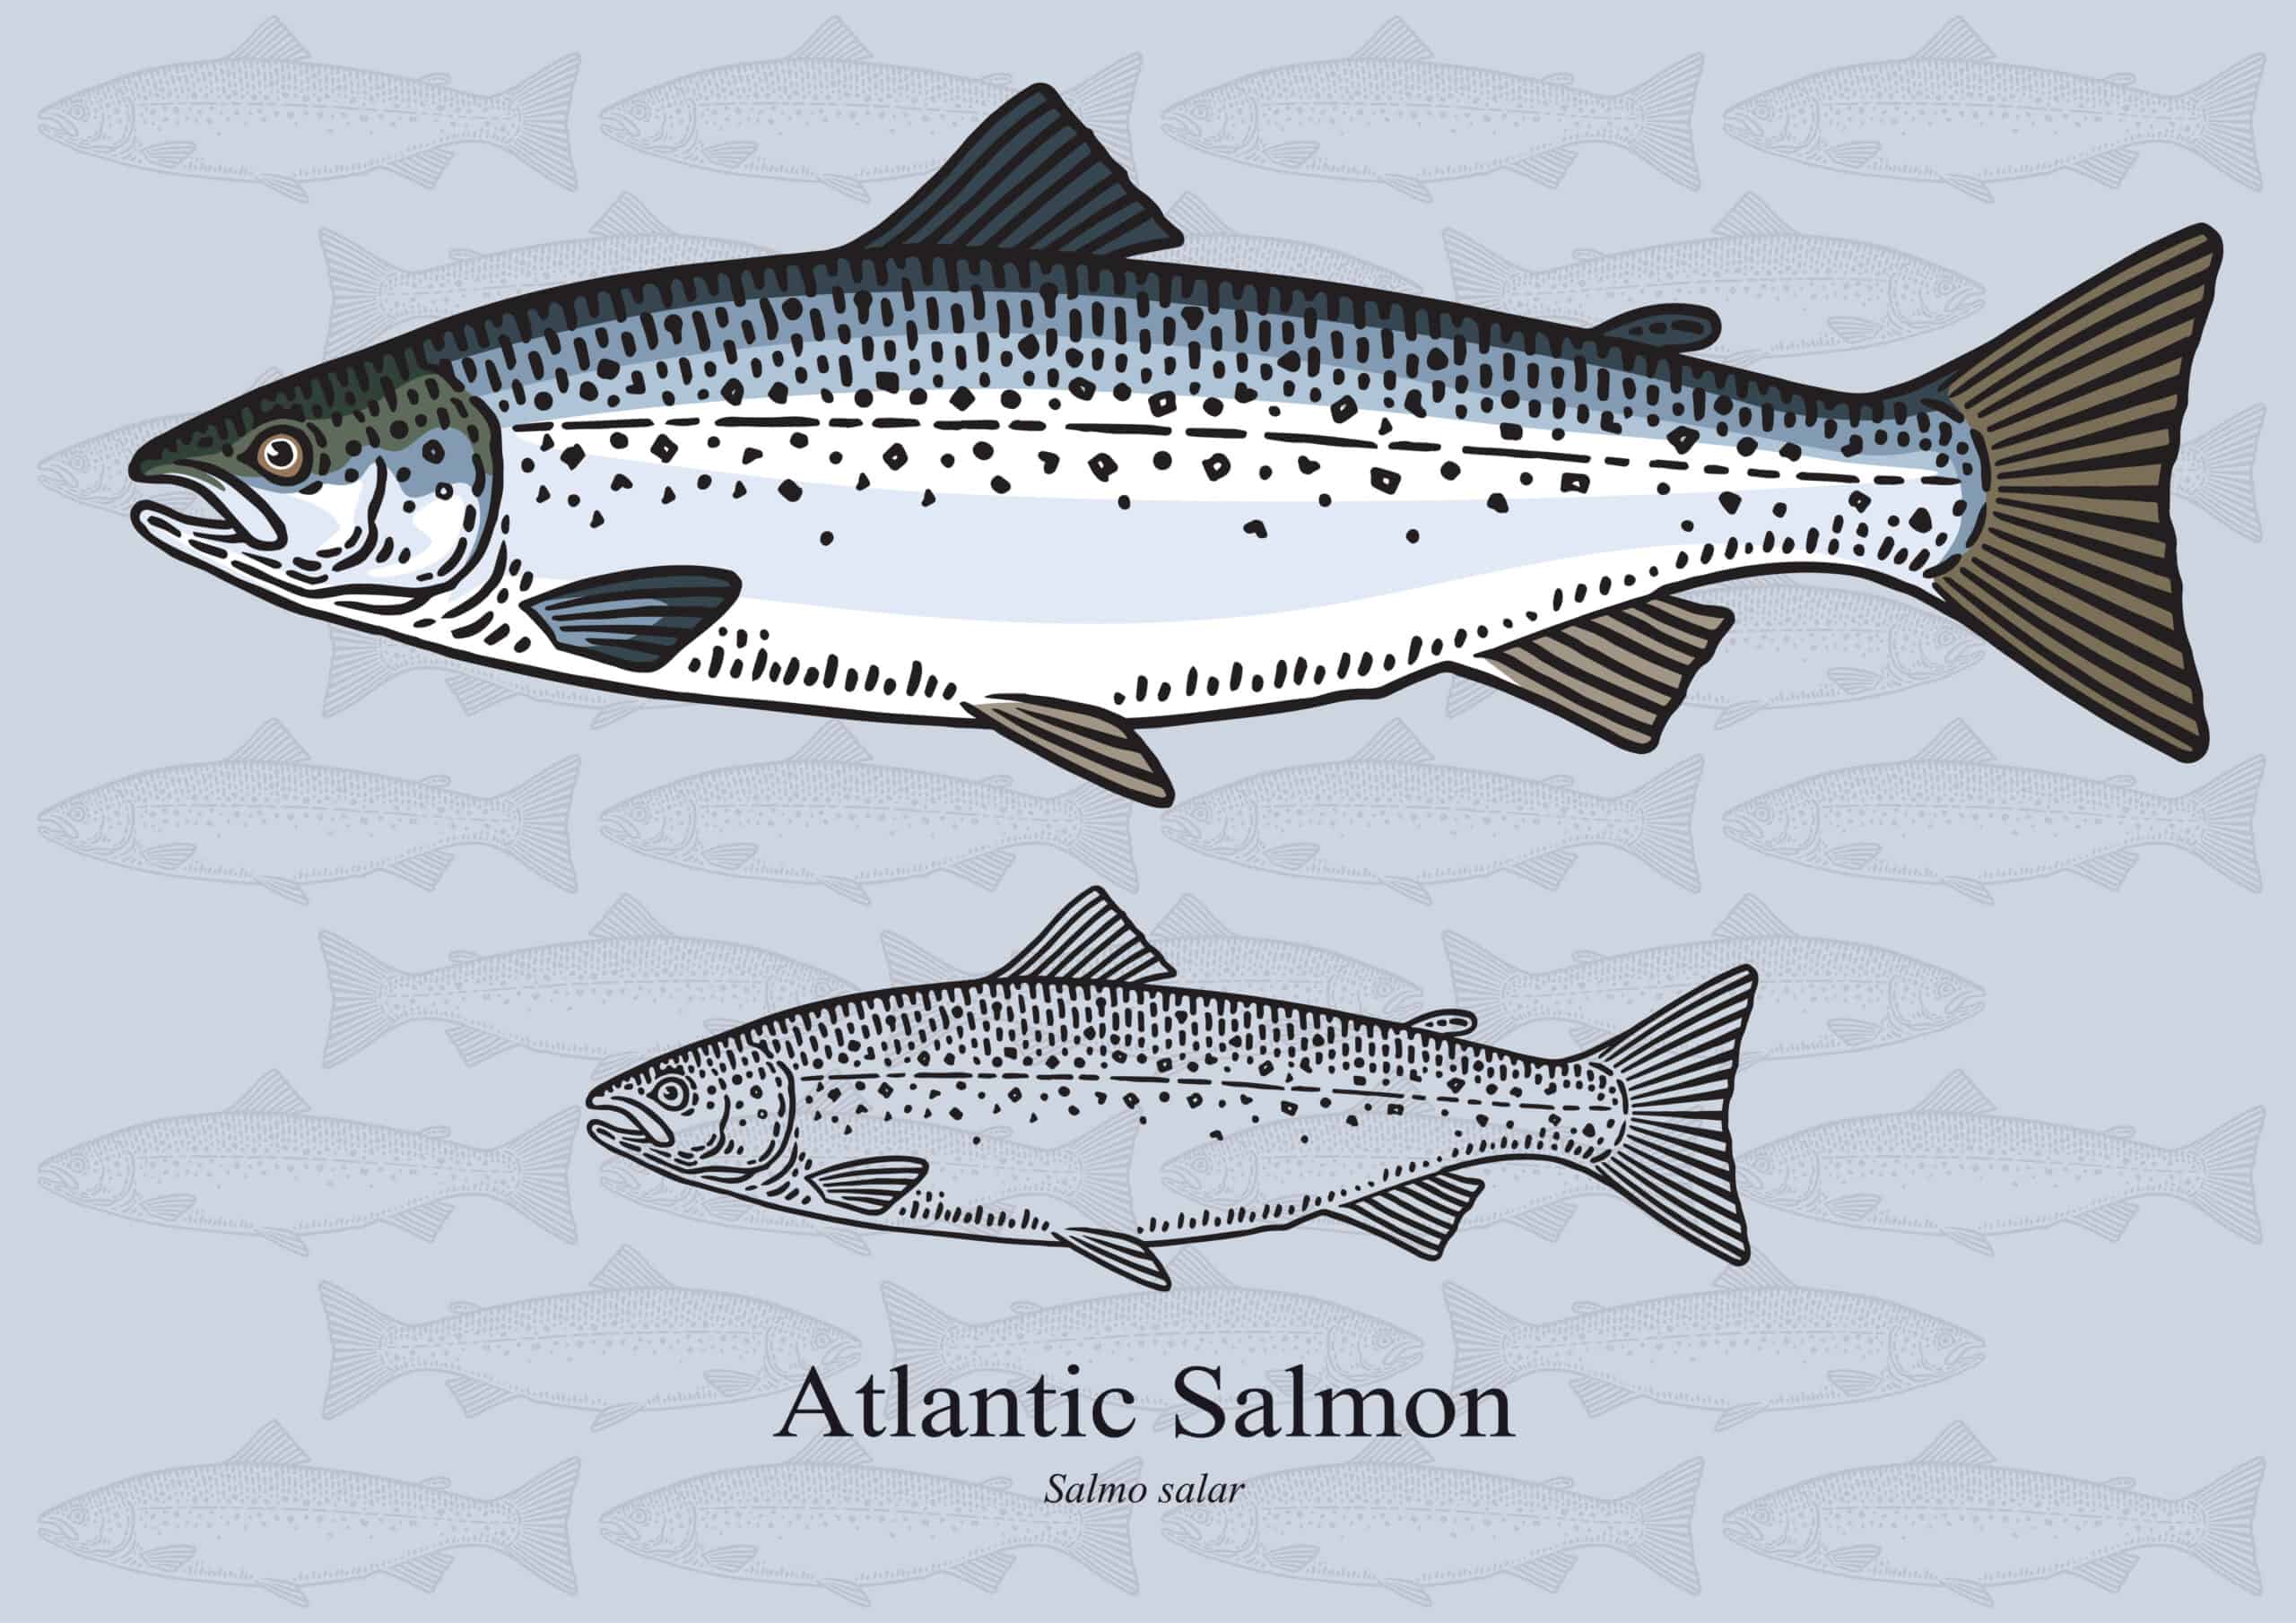 Figure drawing of an Atlantic Salmon in color and black and white.